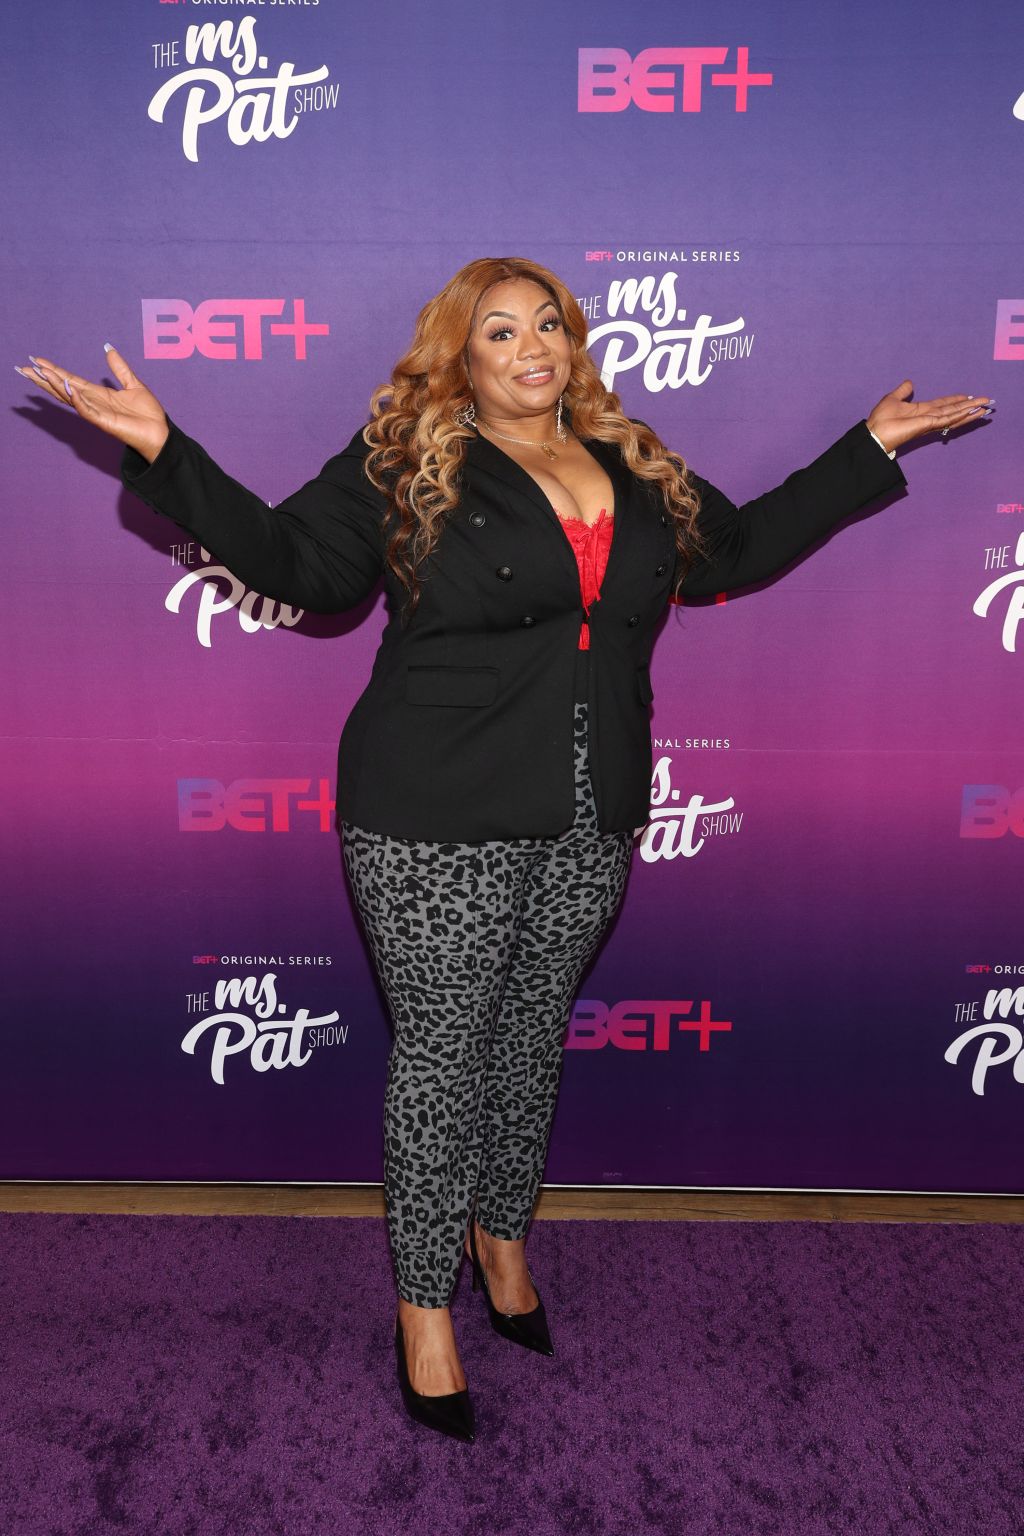 The Ms. Pat Show On BET+